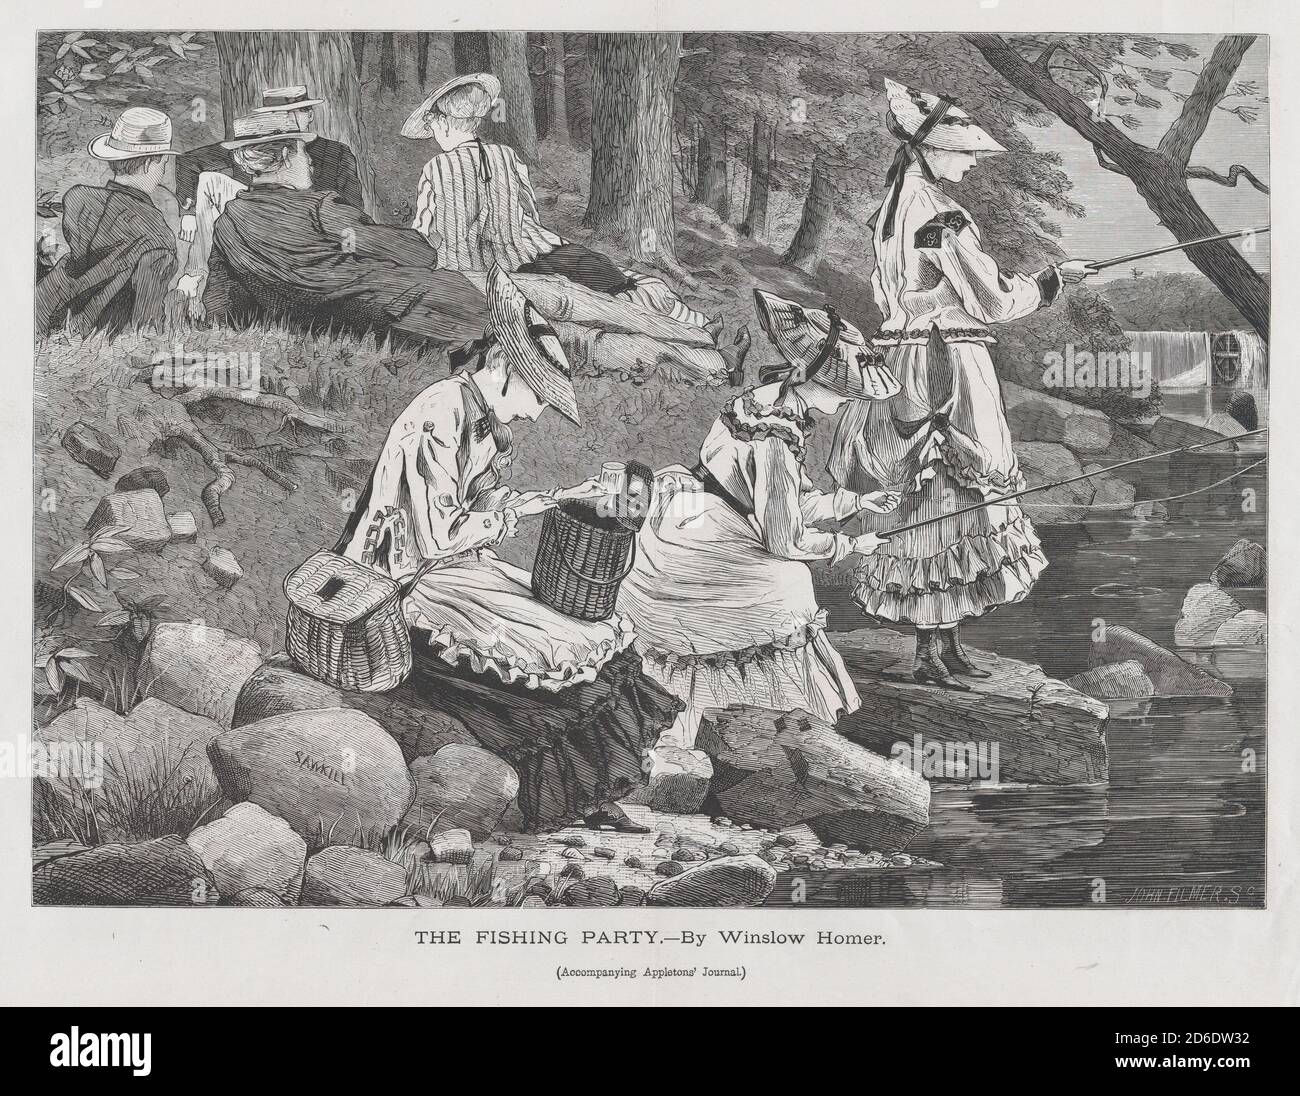 The Fishing Party (Appleton's Journal, Vol. II), October 2, 1869. Stock Photo